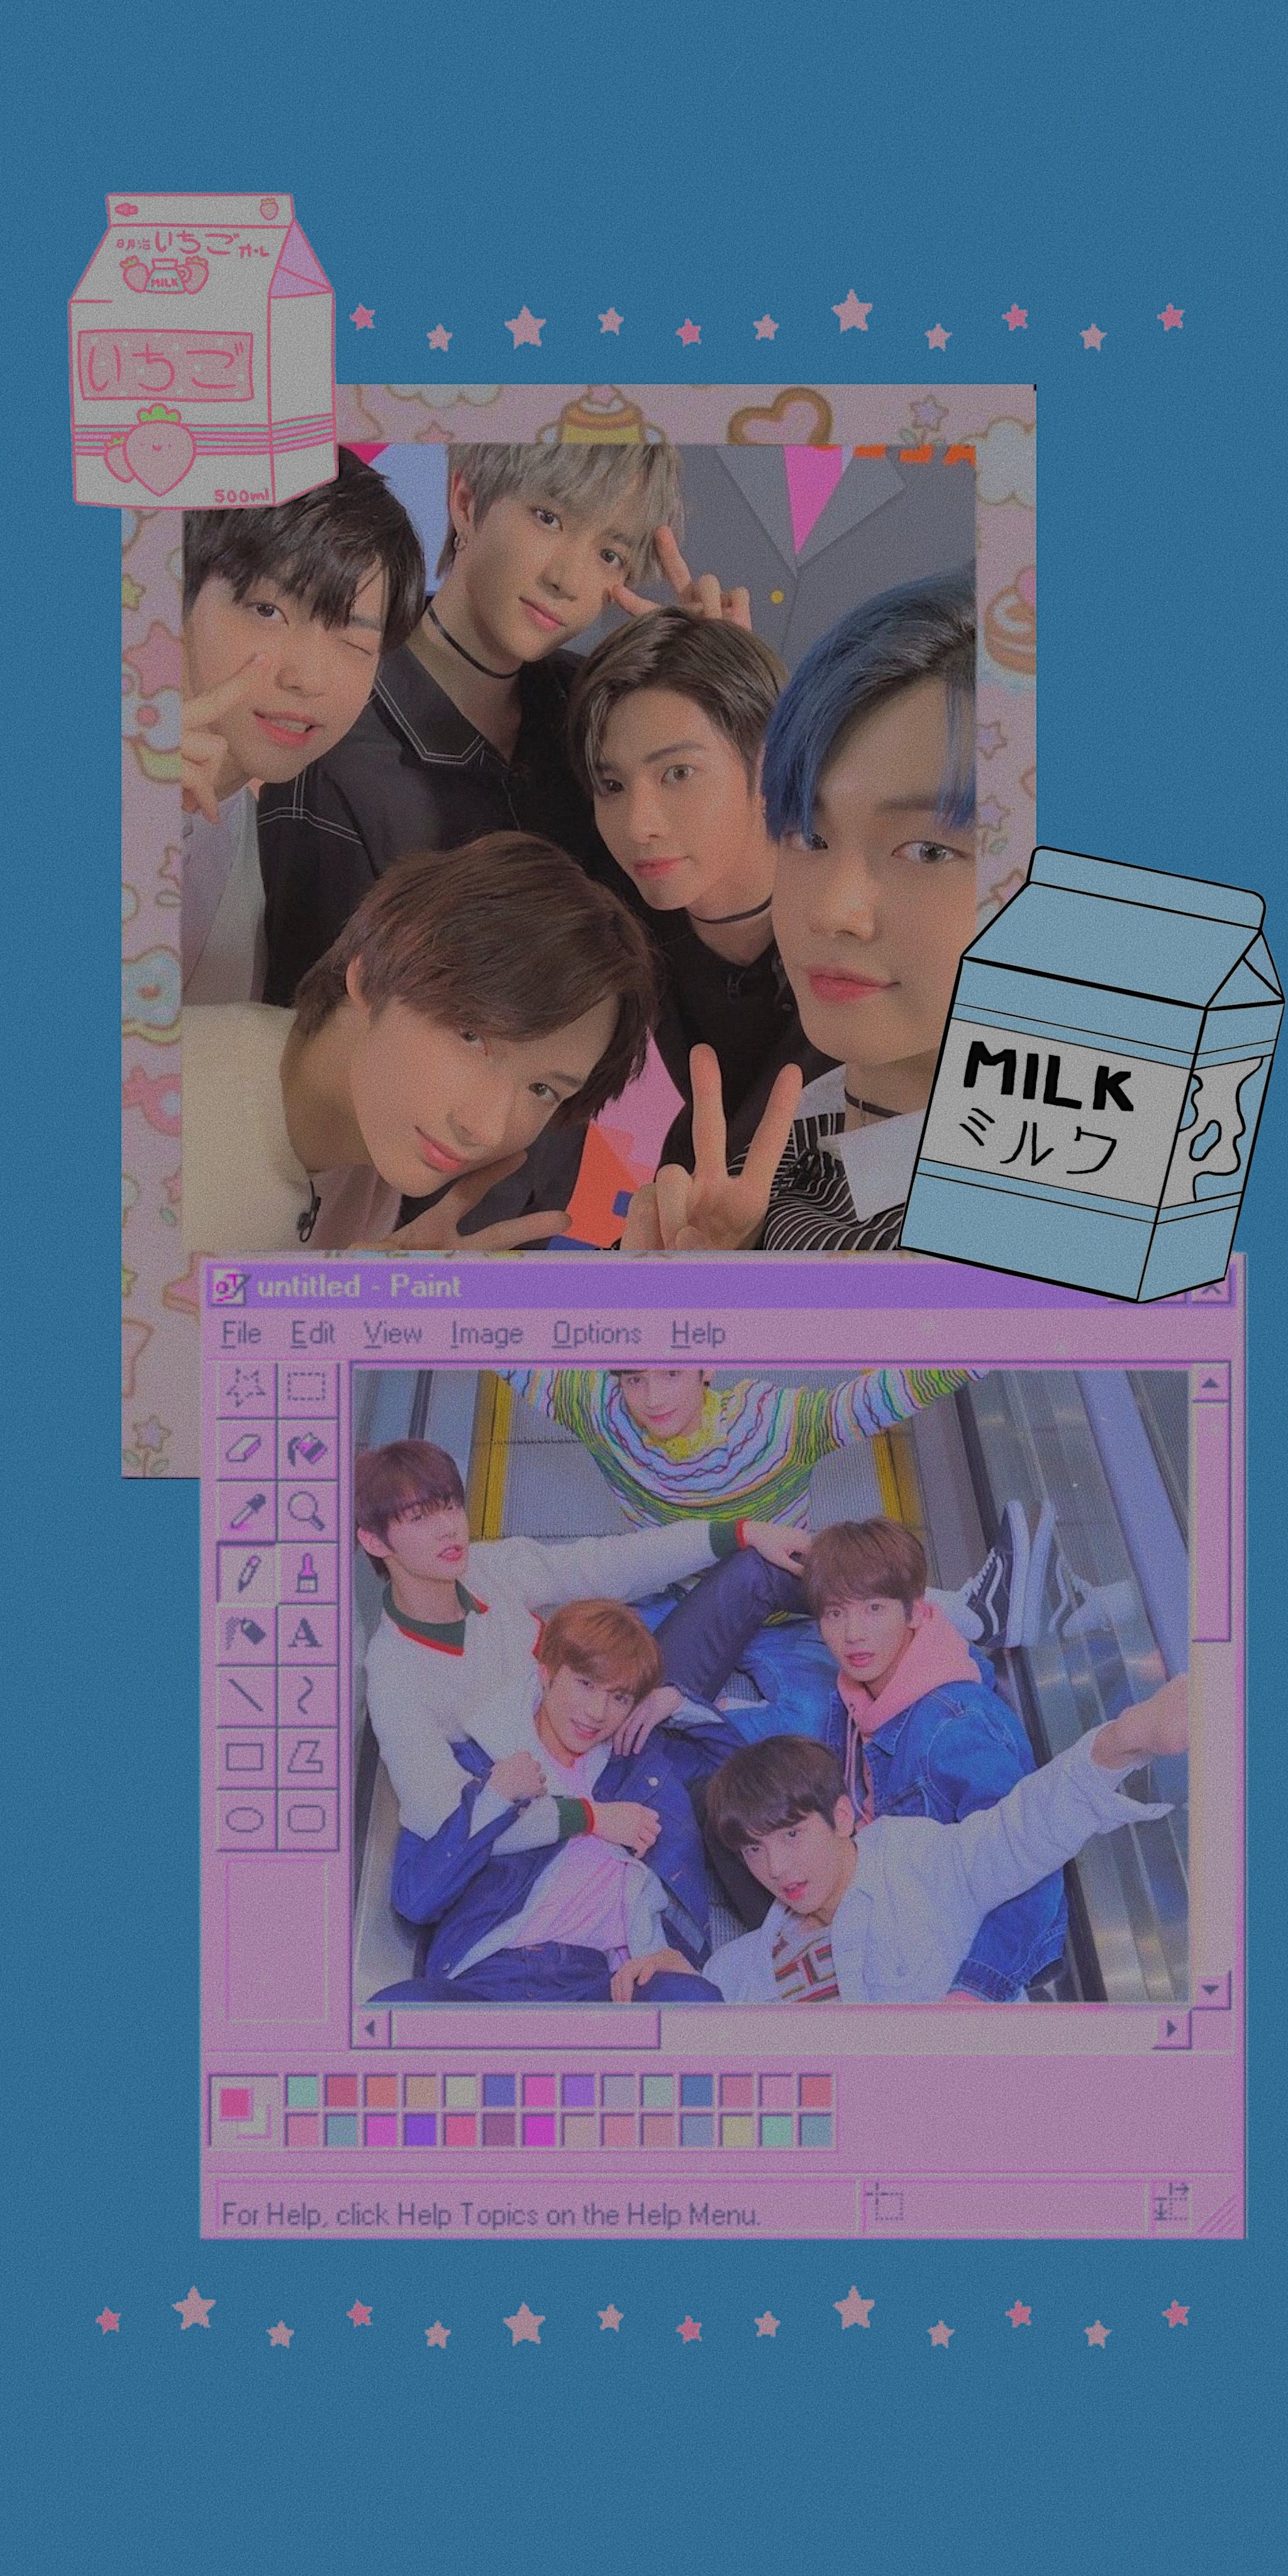 Txt Aesthetic Wallpapers